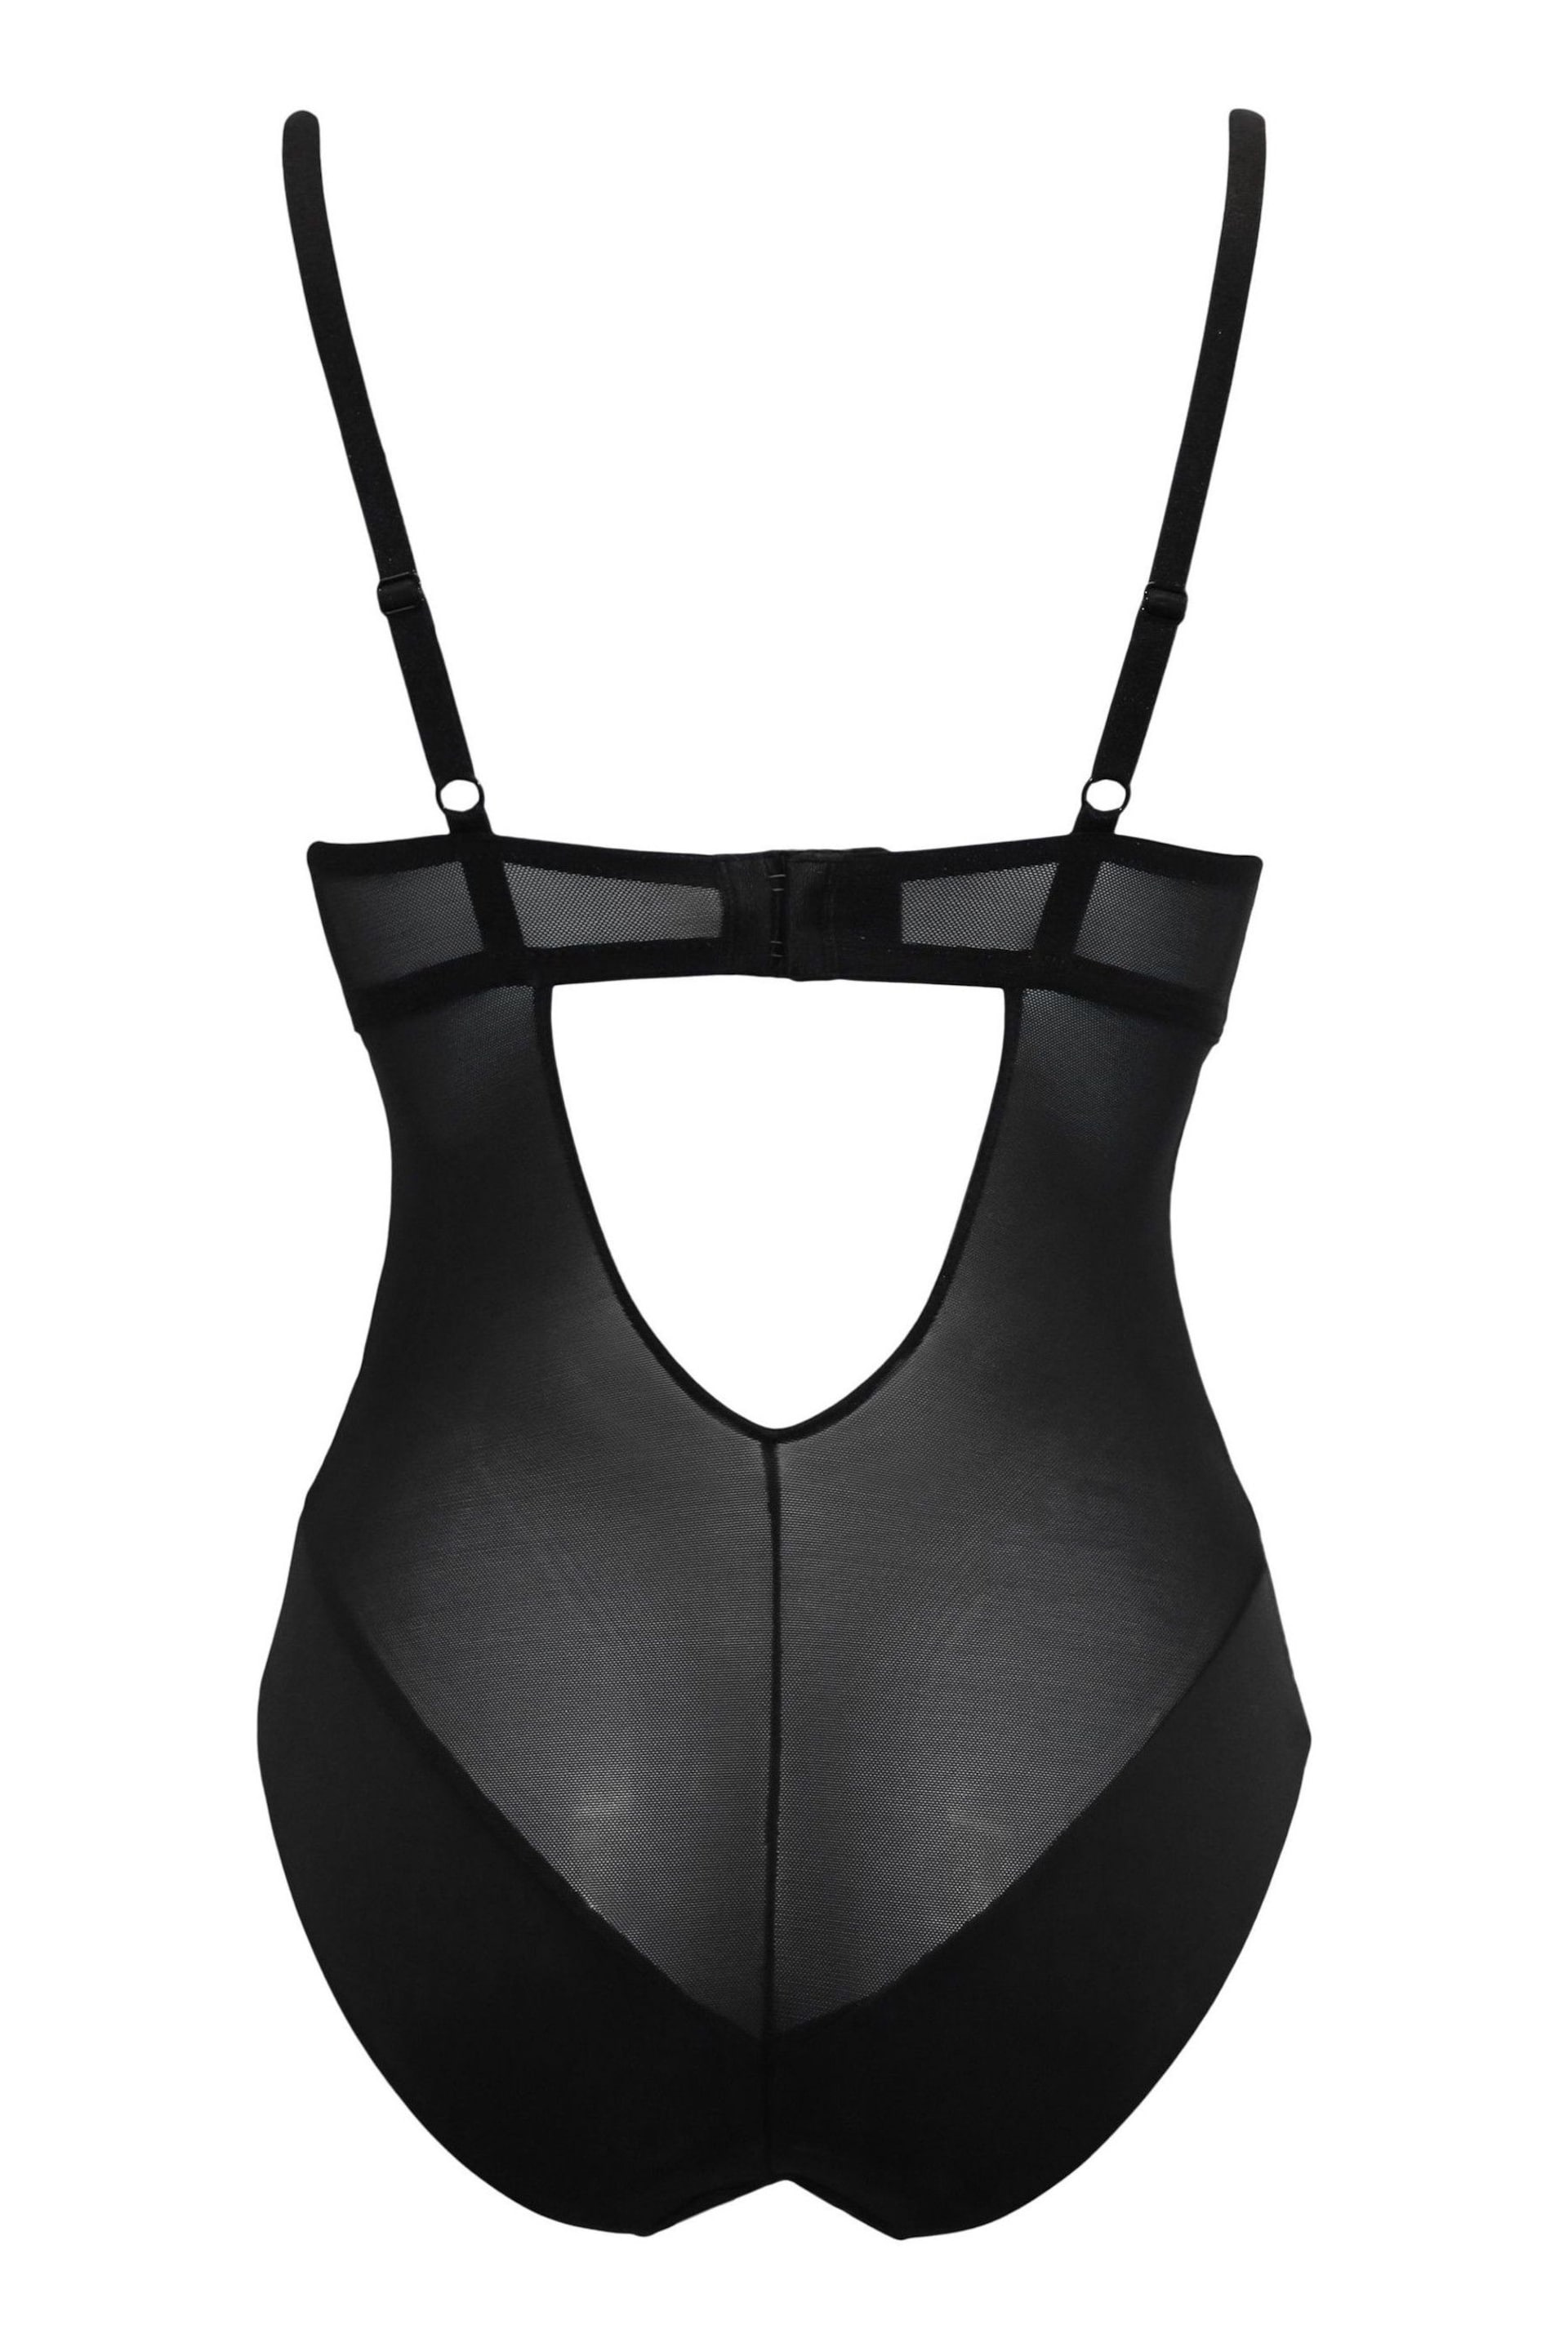 Pour Moi Black Romance Padded Push Up Body - Image 4 of 4